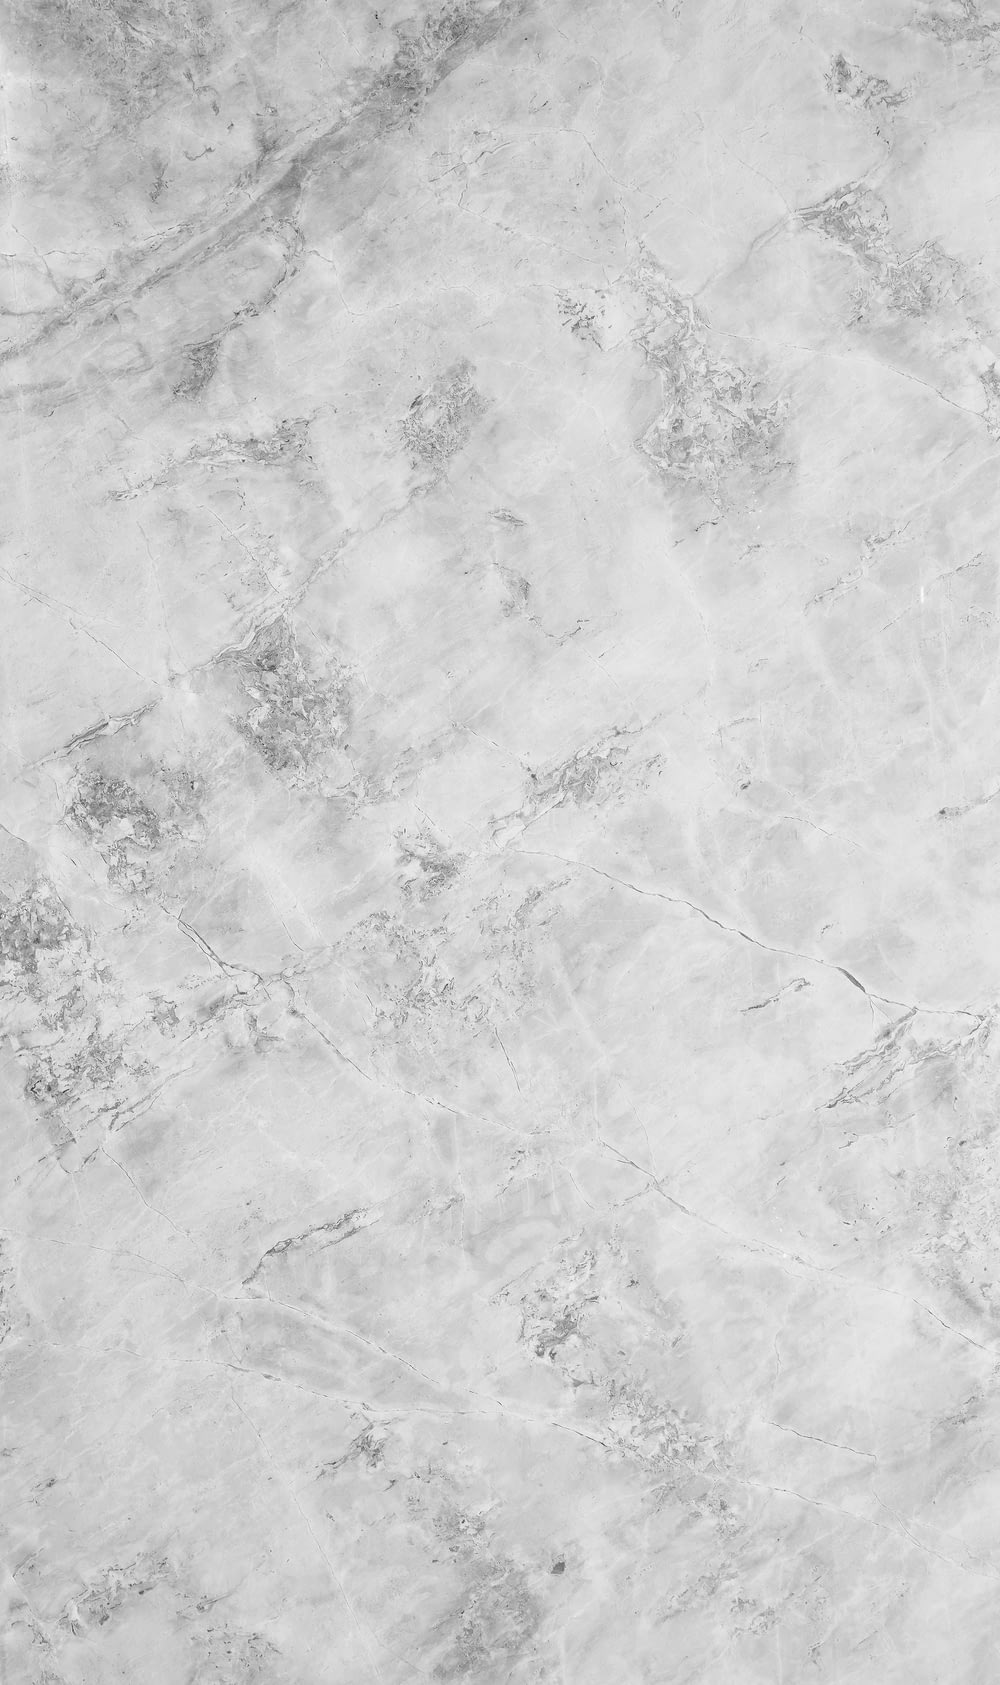 a black and white photo of a marble surface